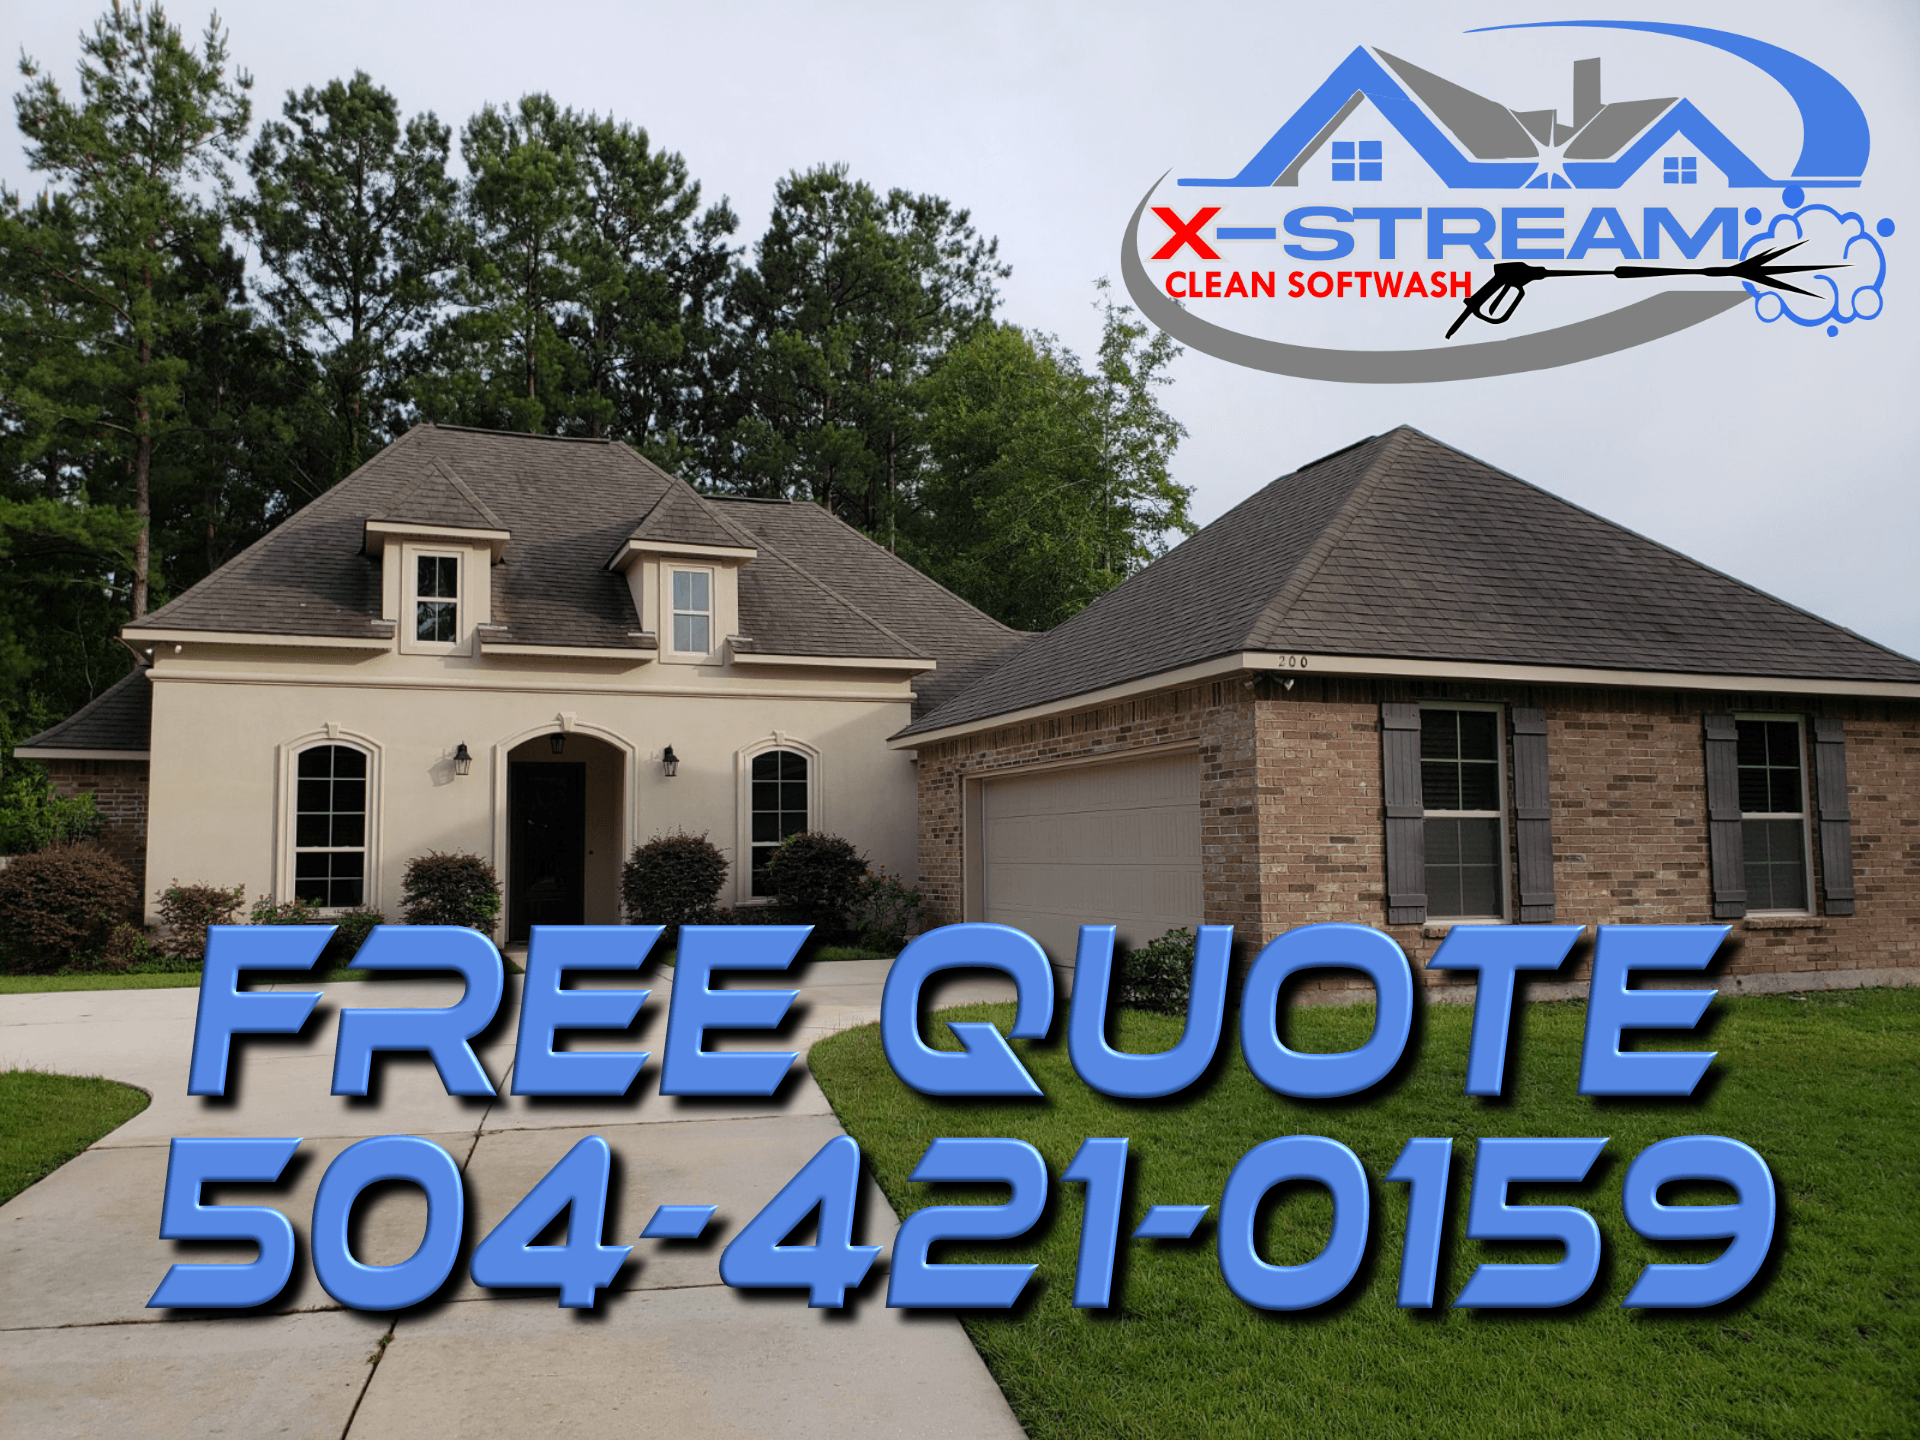 Banner Image of X-stream Clean soft washing and a clean roof and driveway - 504-421-0159